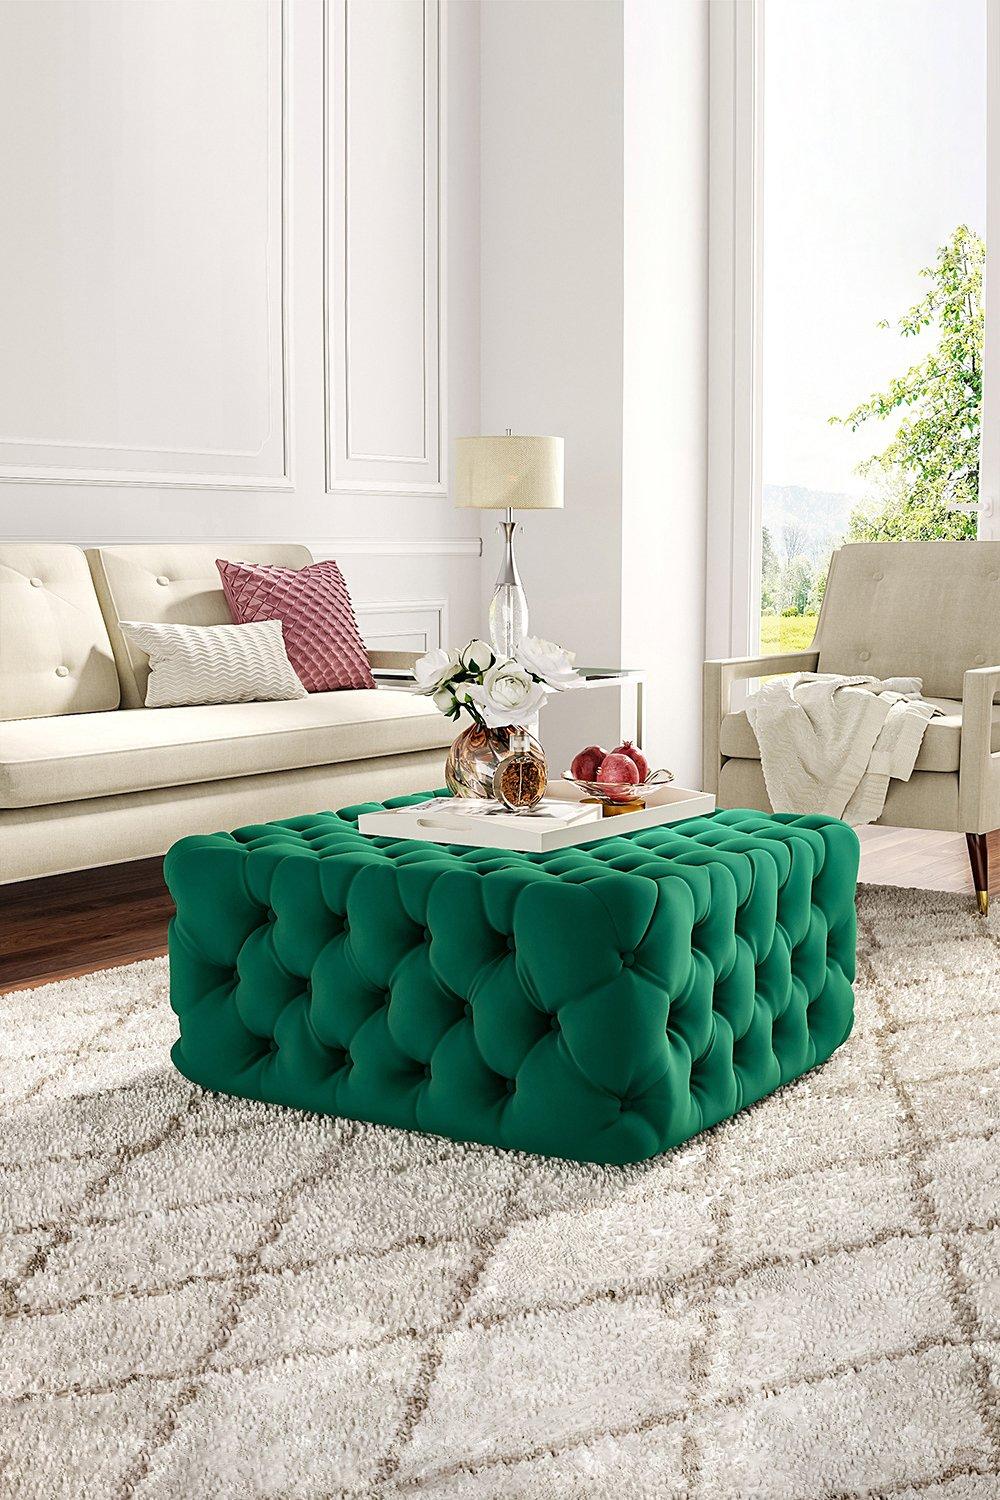 82cm W Green Velvet Buttoned Tufted Square Footstool Coffee Table